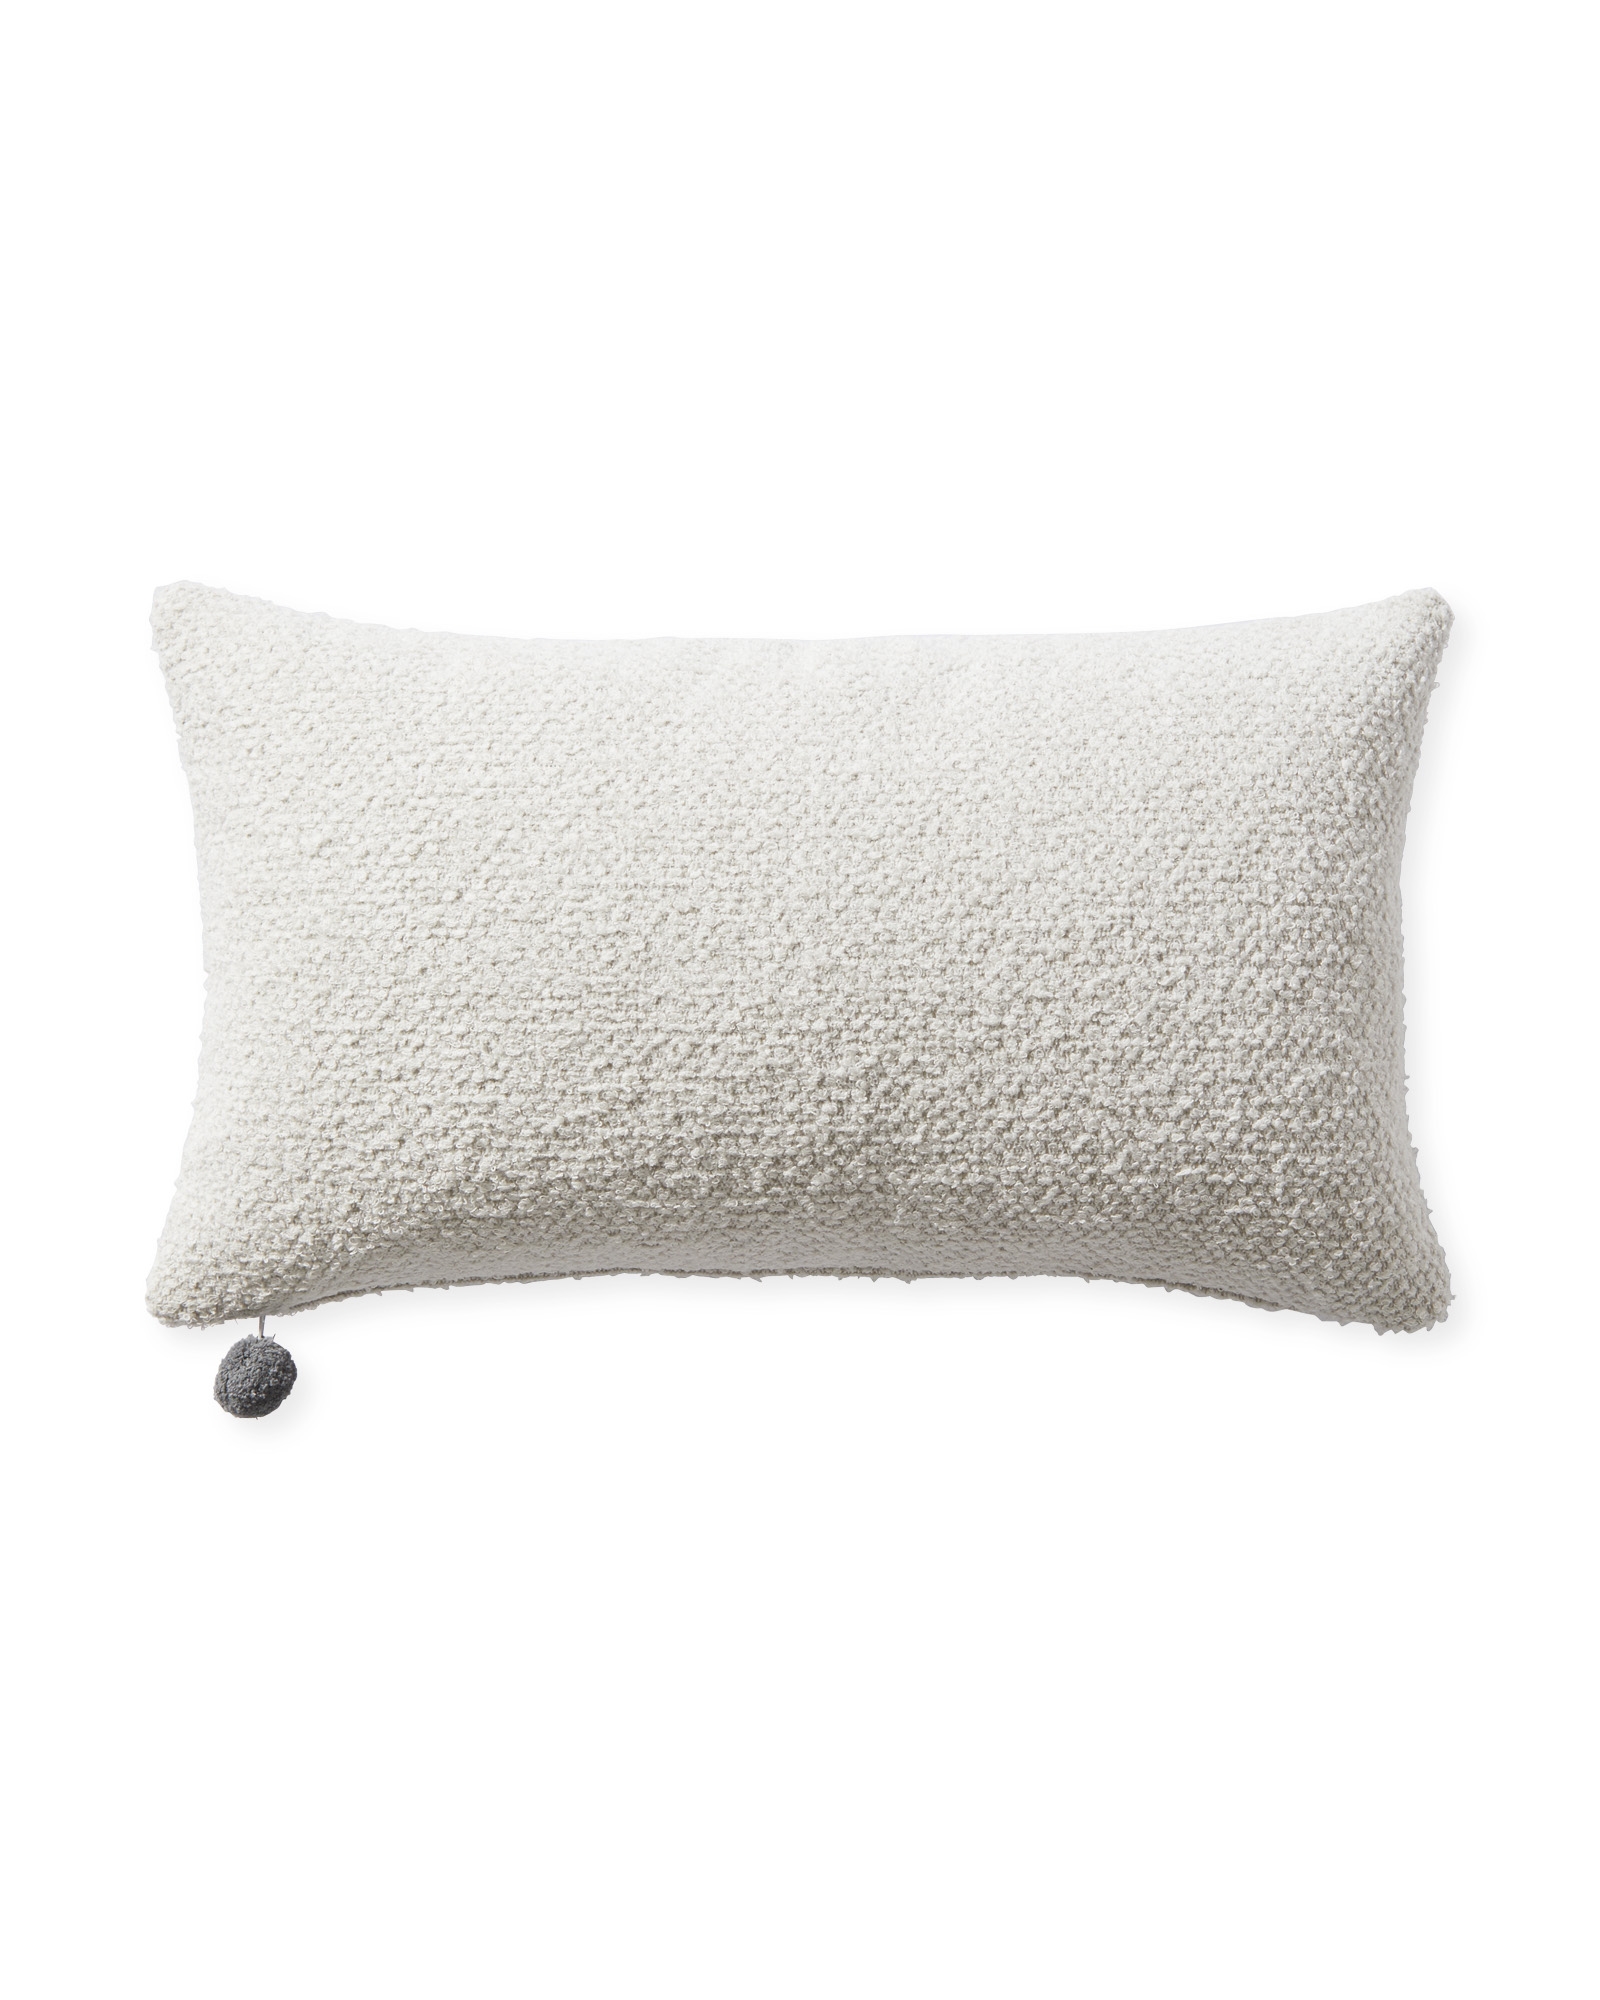 Perennials Performance Textured Loop 12" x 21" Pillow Cover - Ivory - Insert sold separately - Image 0